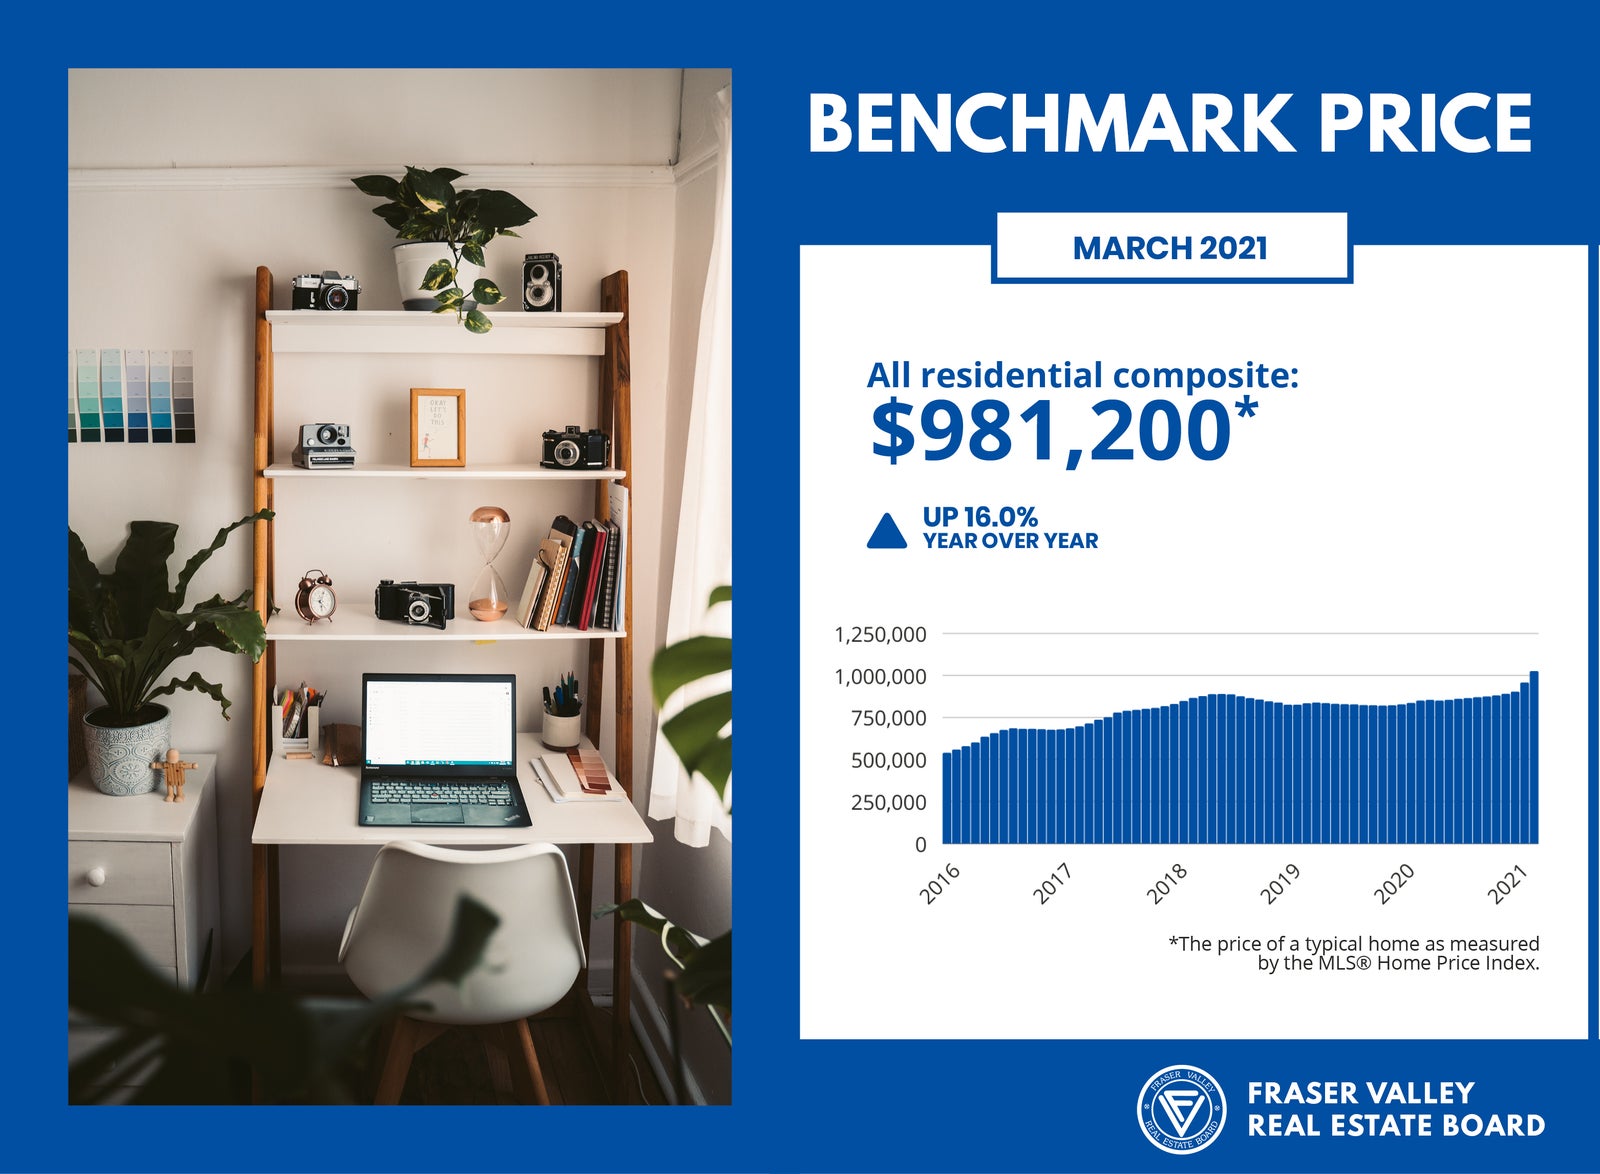 Benchmark Price March 2021 - FVREB